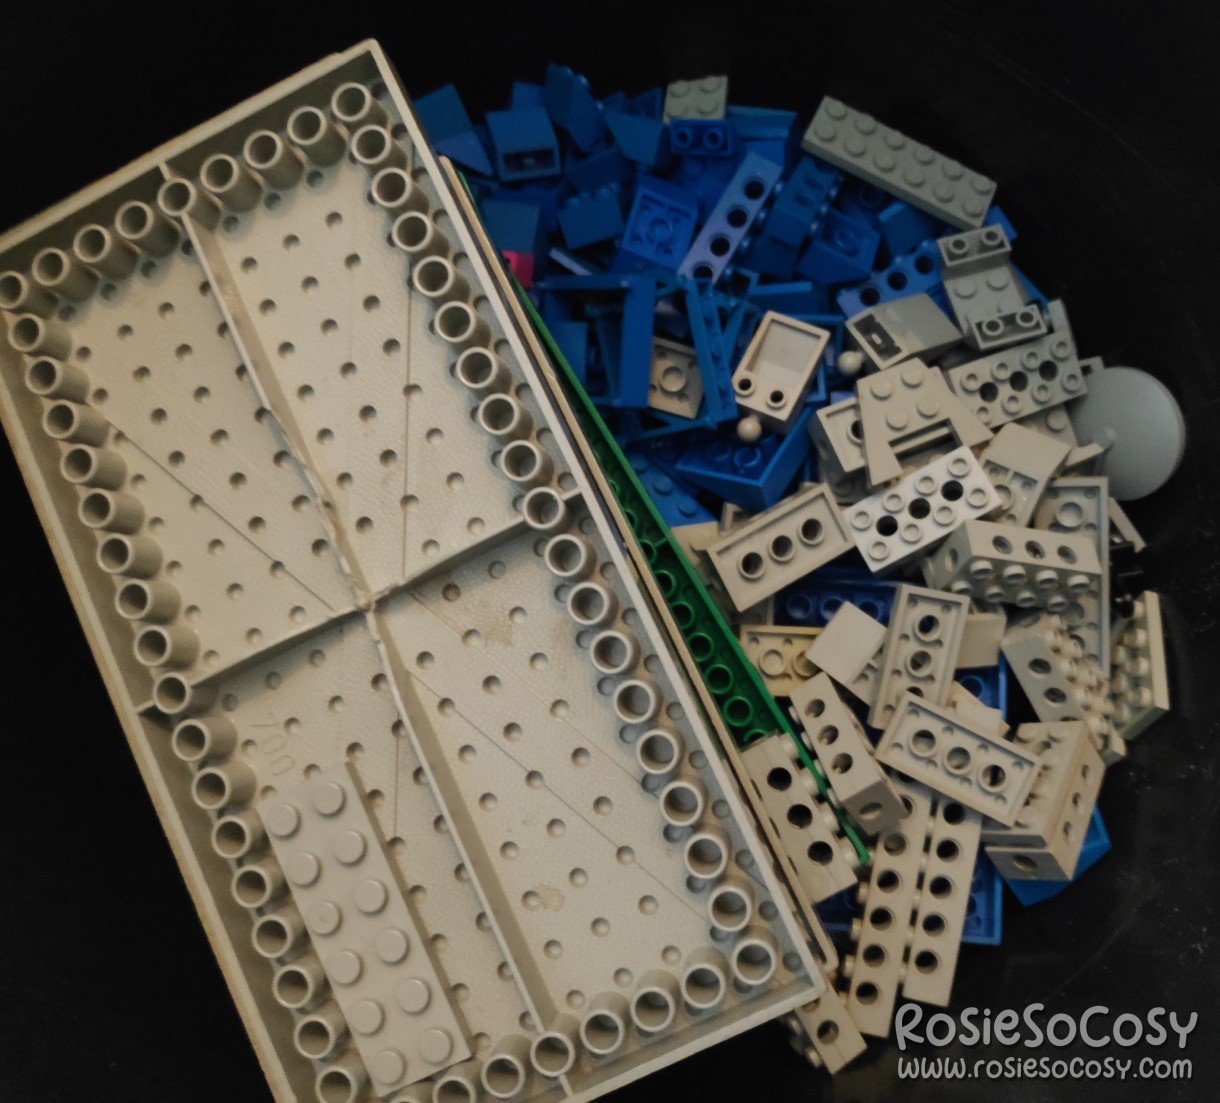 New batch of old LEGO bricks and parts. Inside a black bucket, blue and light grey LEGO from the 80s.